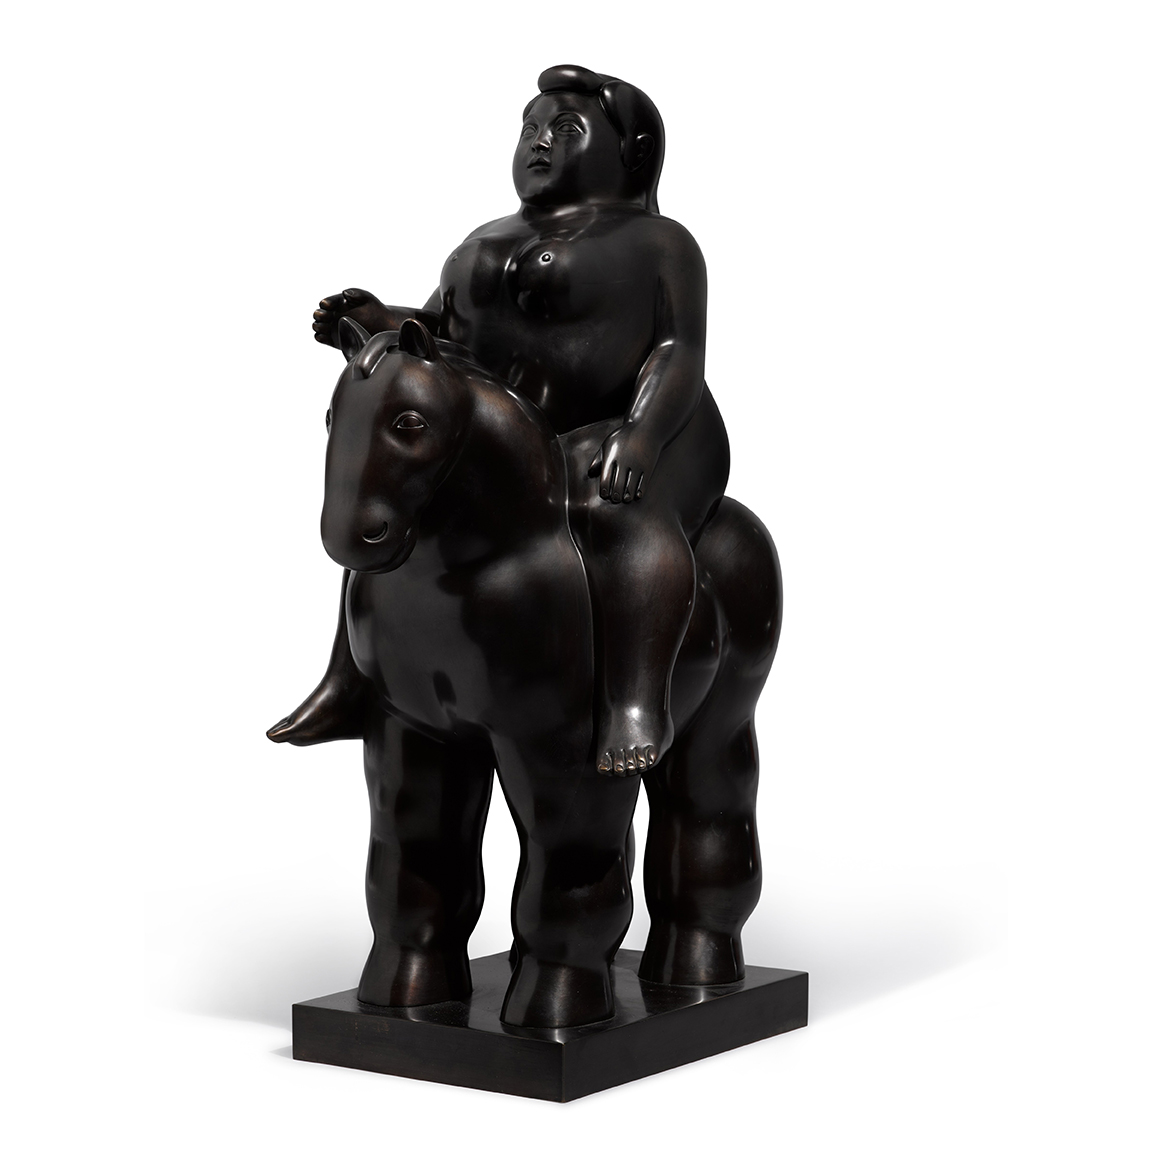 Botero Statues for Sale